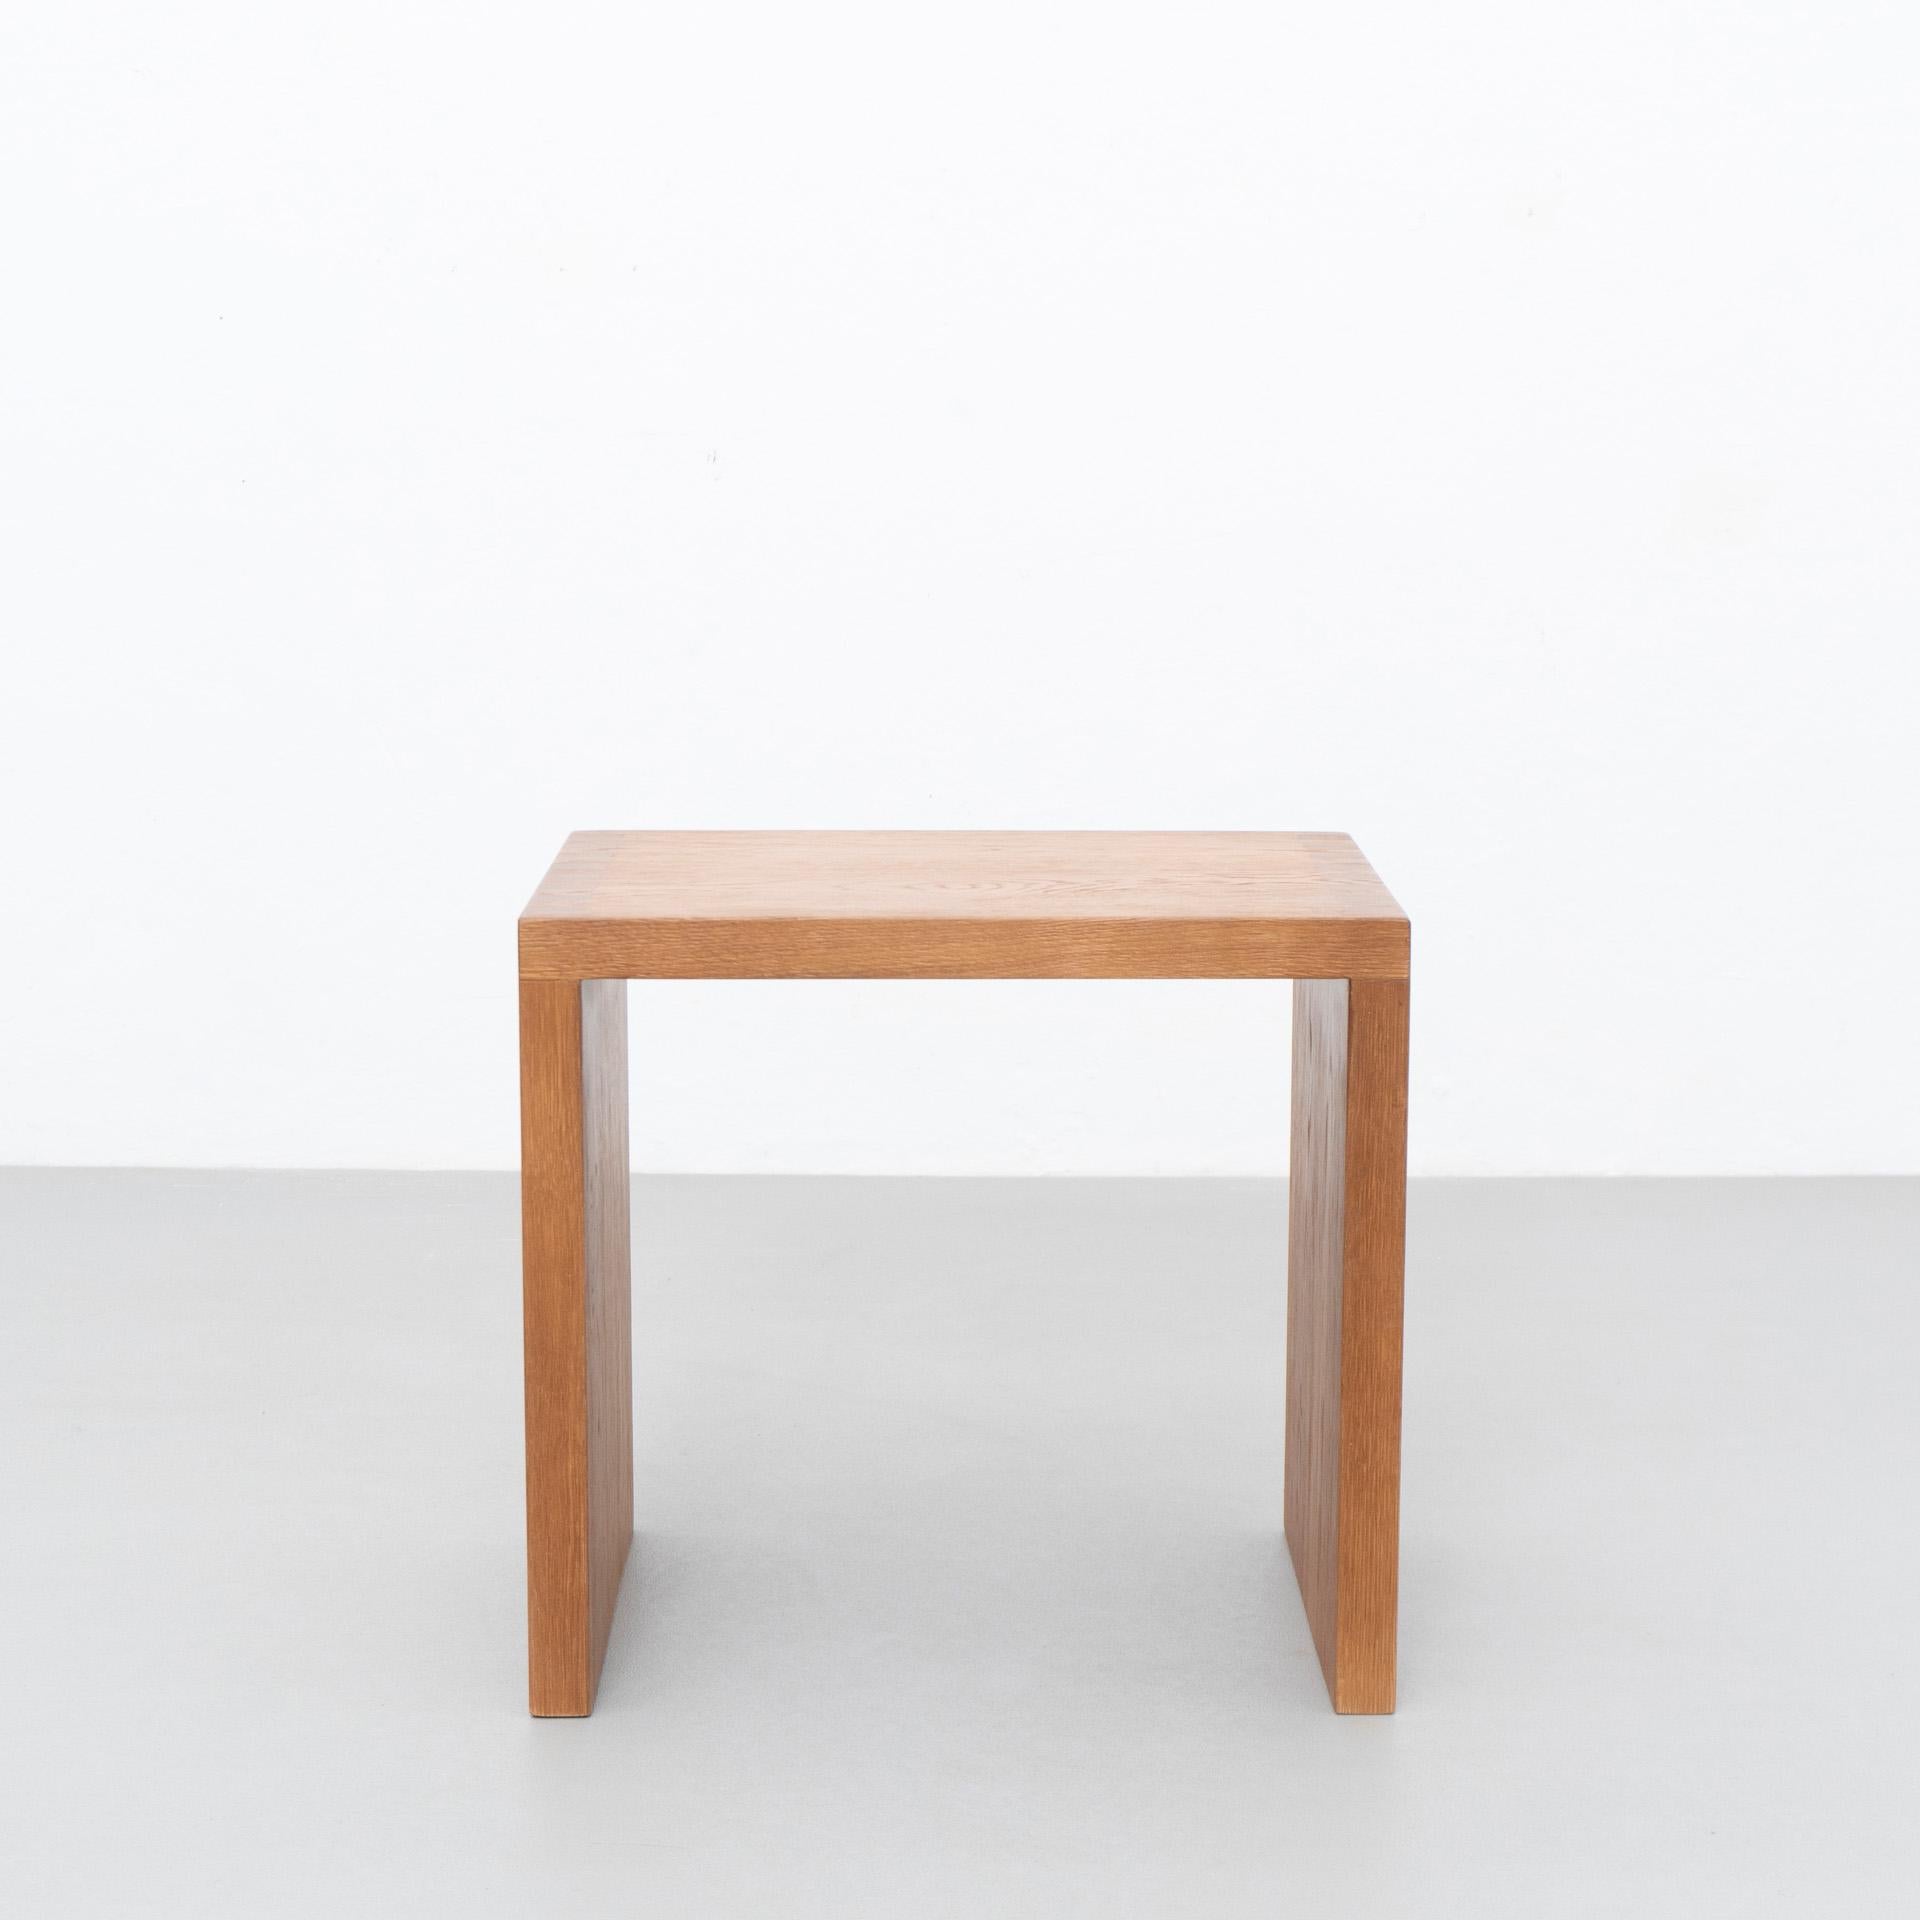 Table by Dada est. manufactured in Barcelona, 2021.

Material: Oak
Dimensions: 32 cm D x 43 cm W x 40 cm H 

Production delay: 8-9 weeks

There is the possibility of making it in different measures and woods.

Dada Est. Makes a handmade